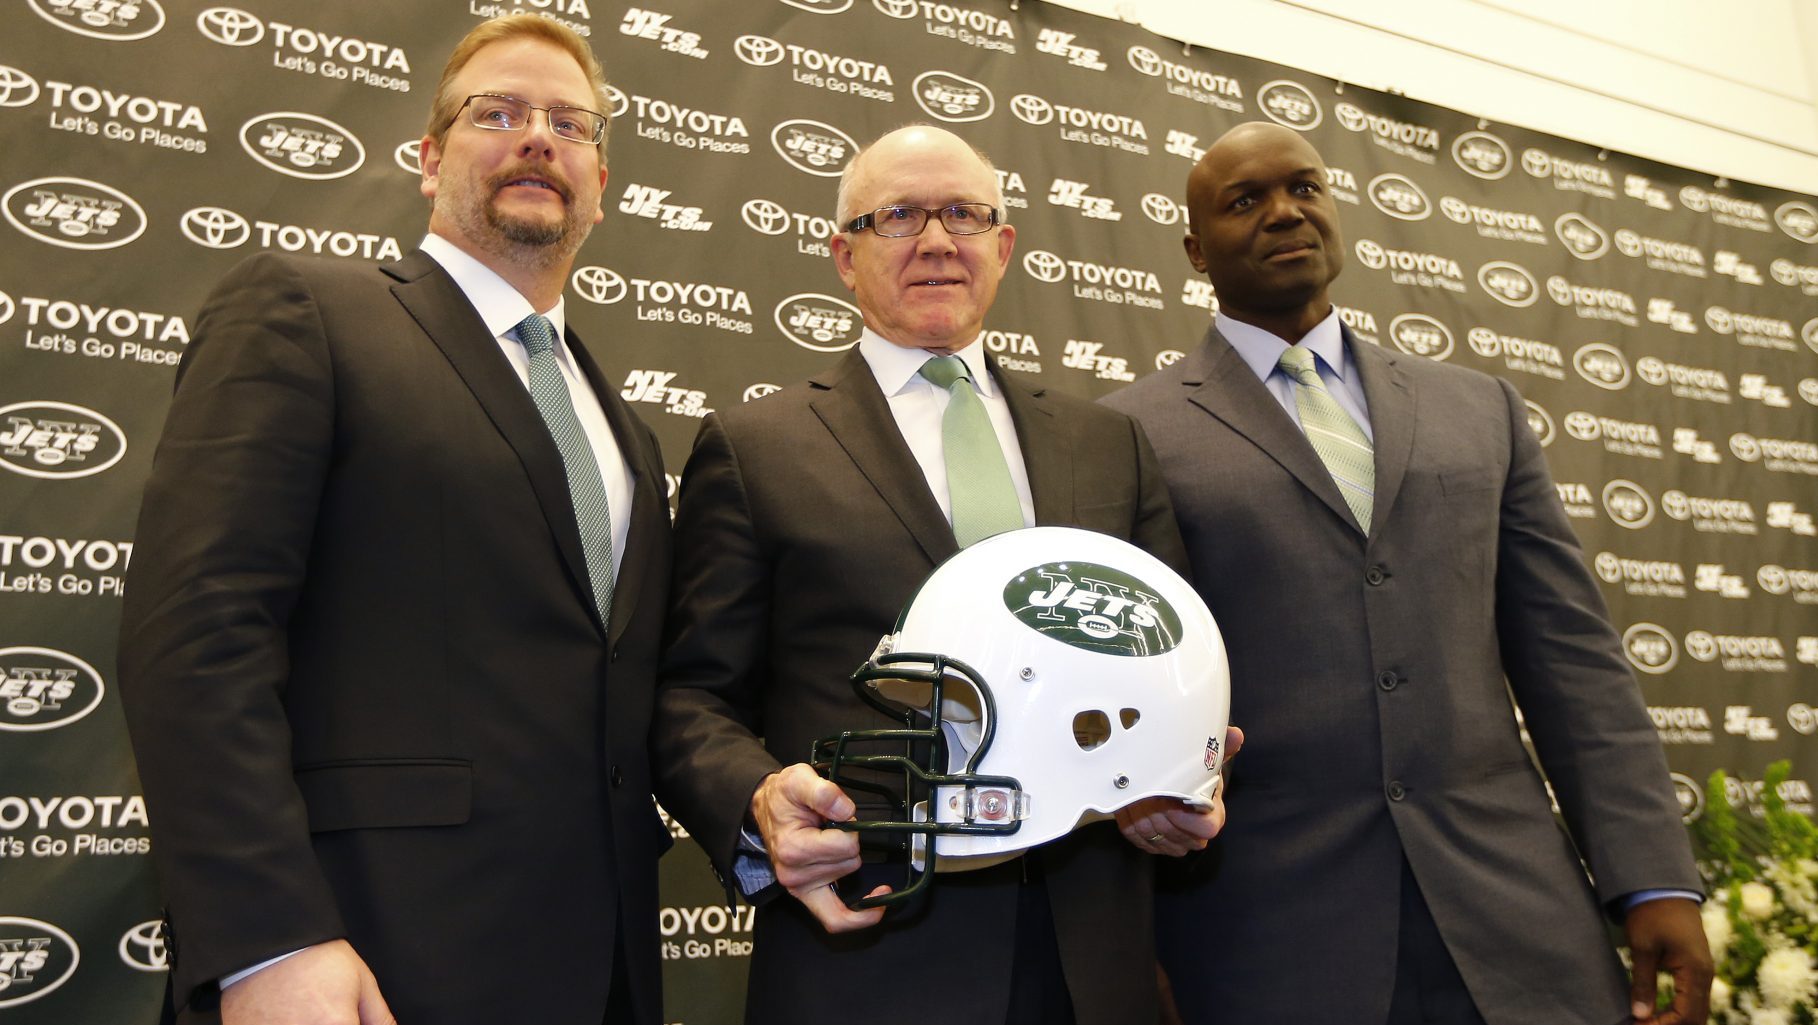 New York Jets, Mike Maccagnan